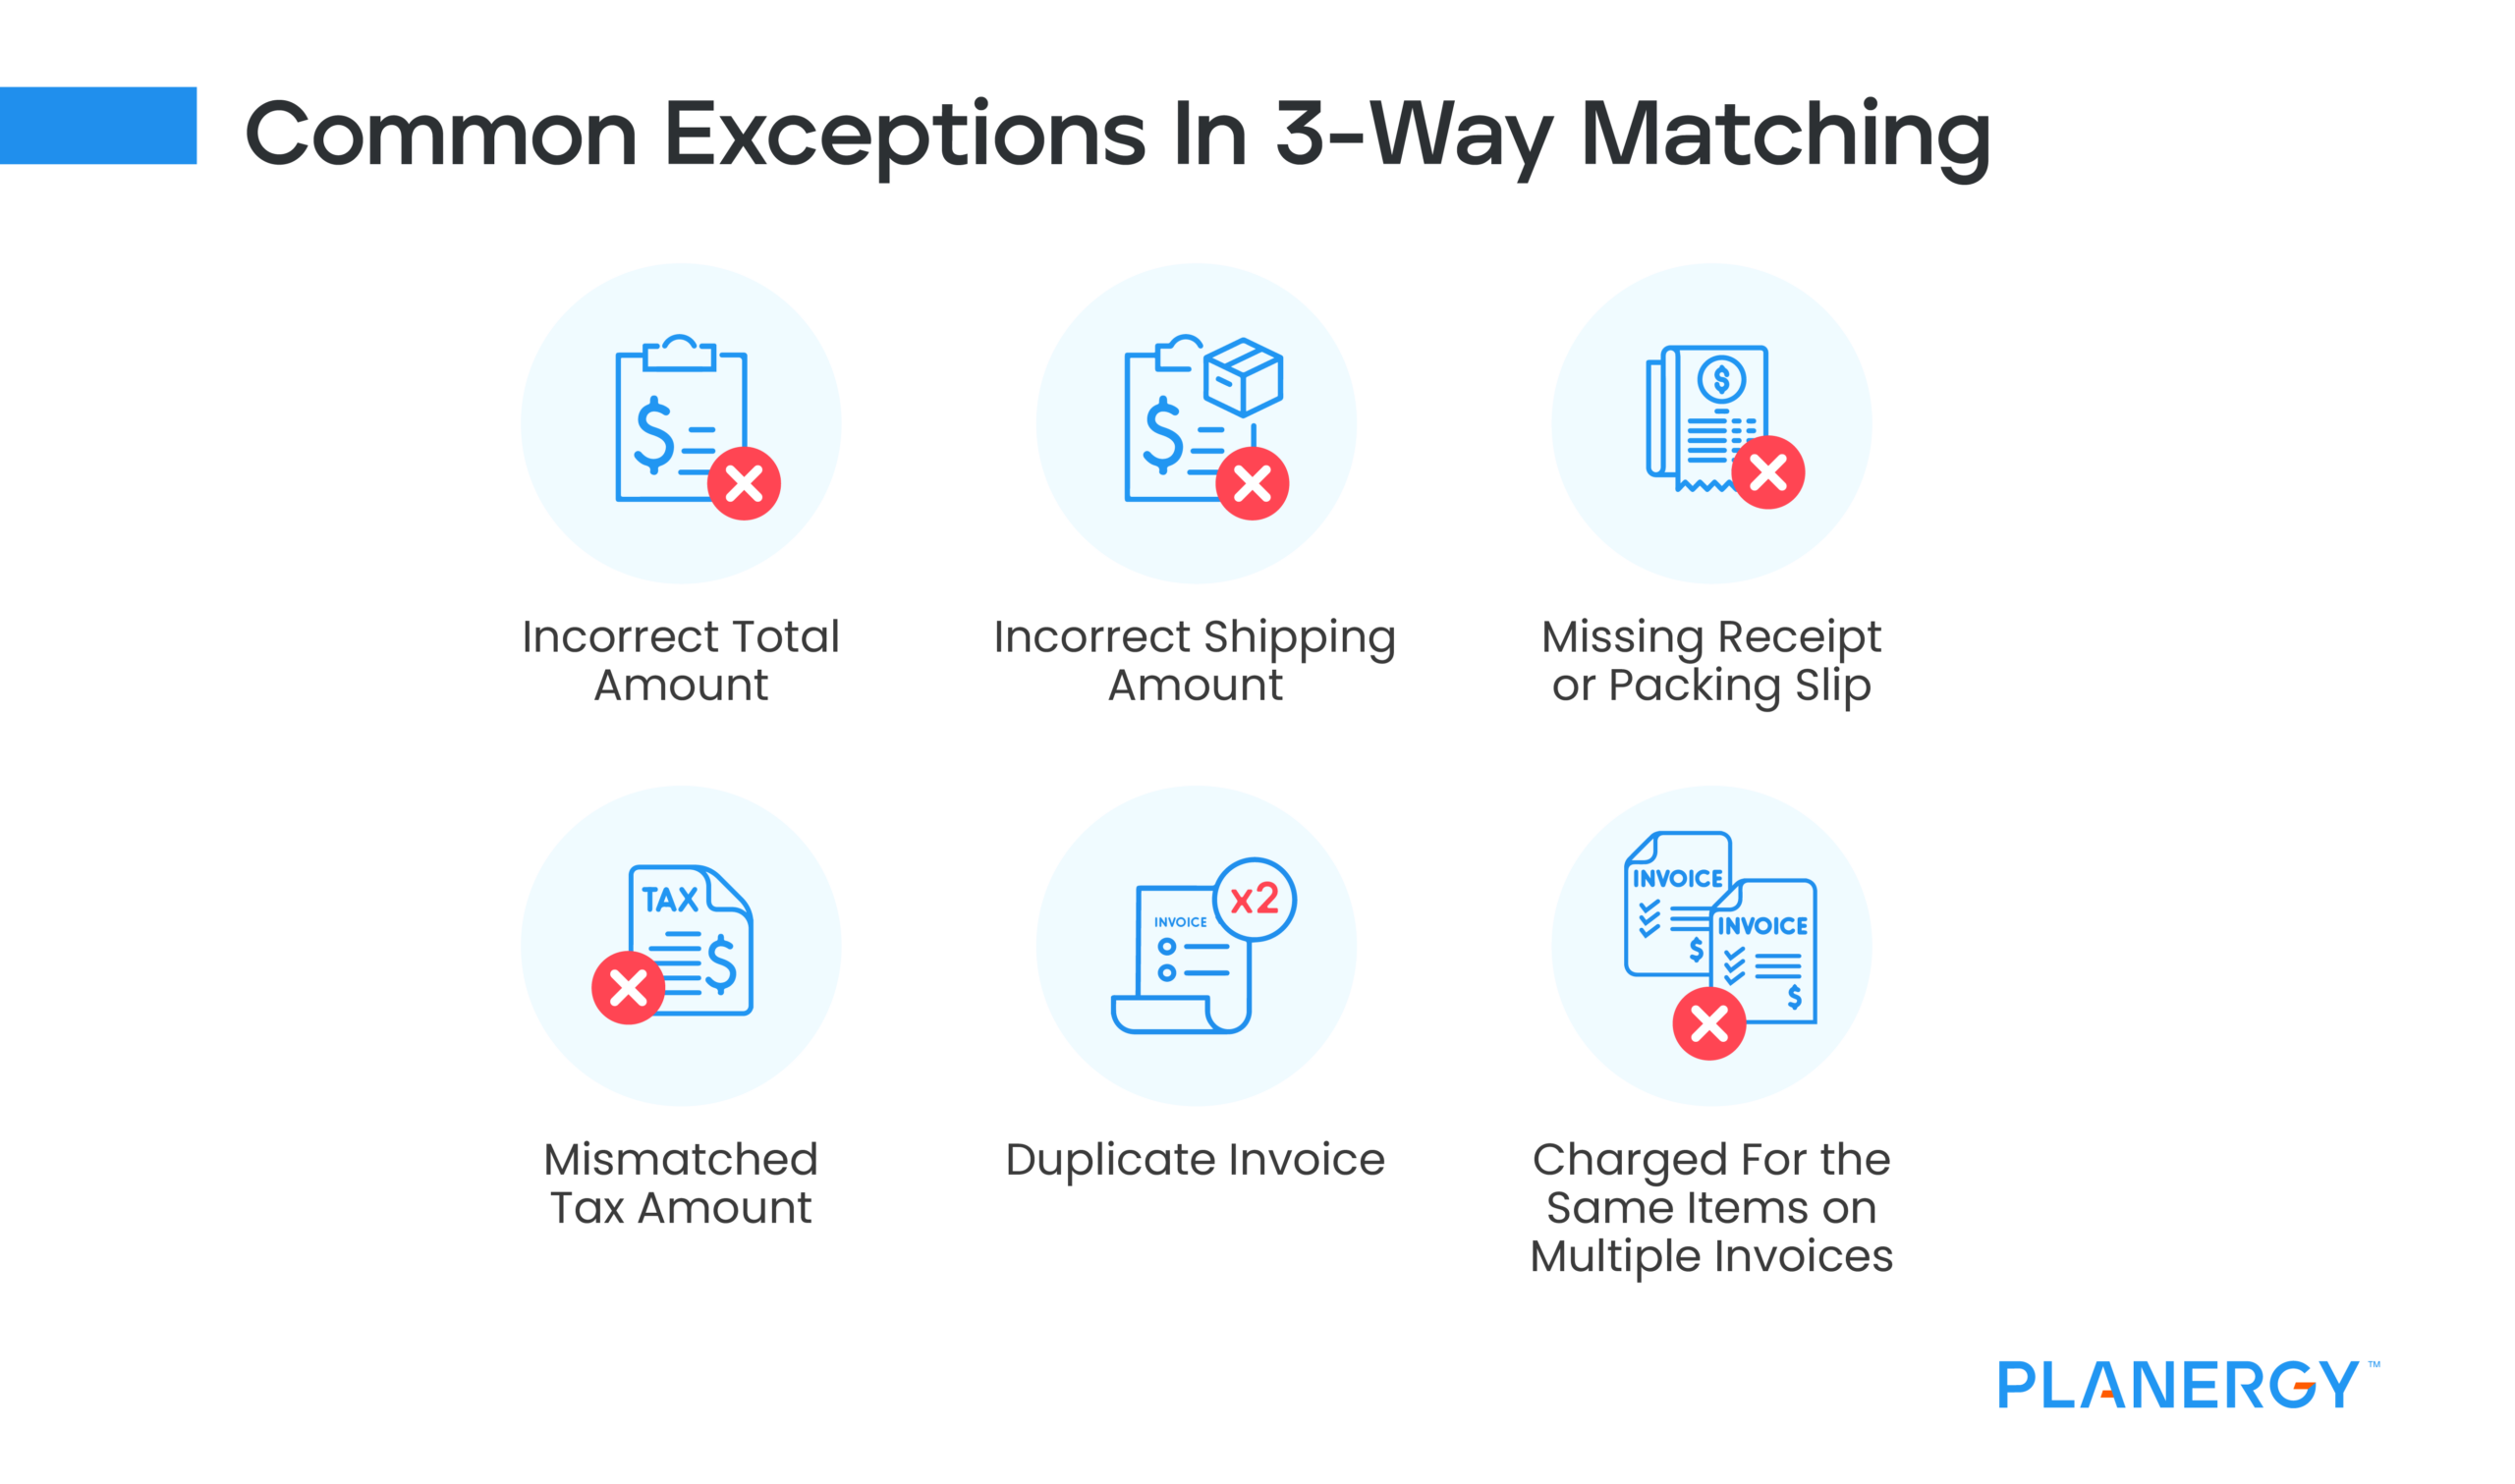 Common Exceptions in 3 Way Matching